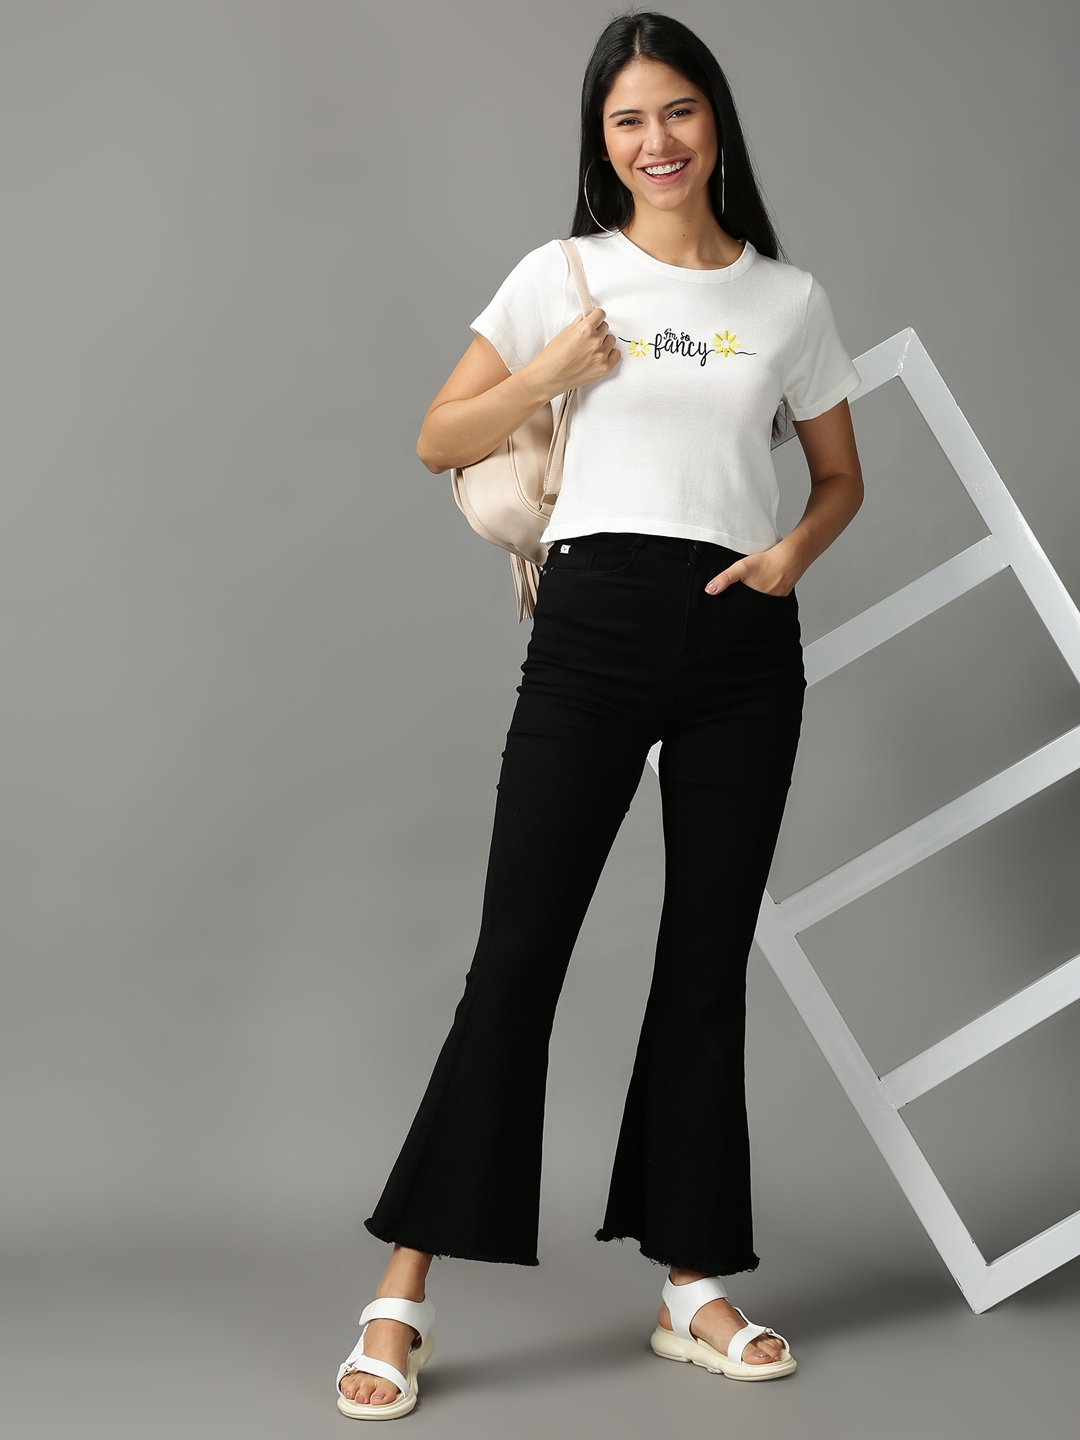 Women's White Polycotton Solid Tops